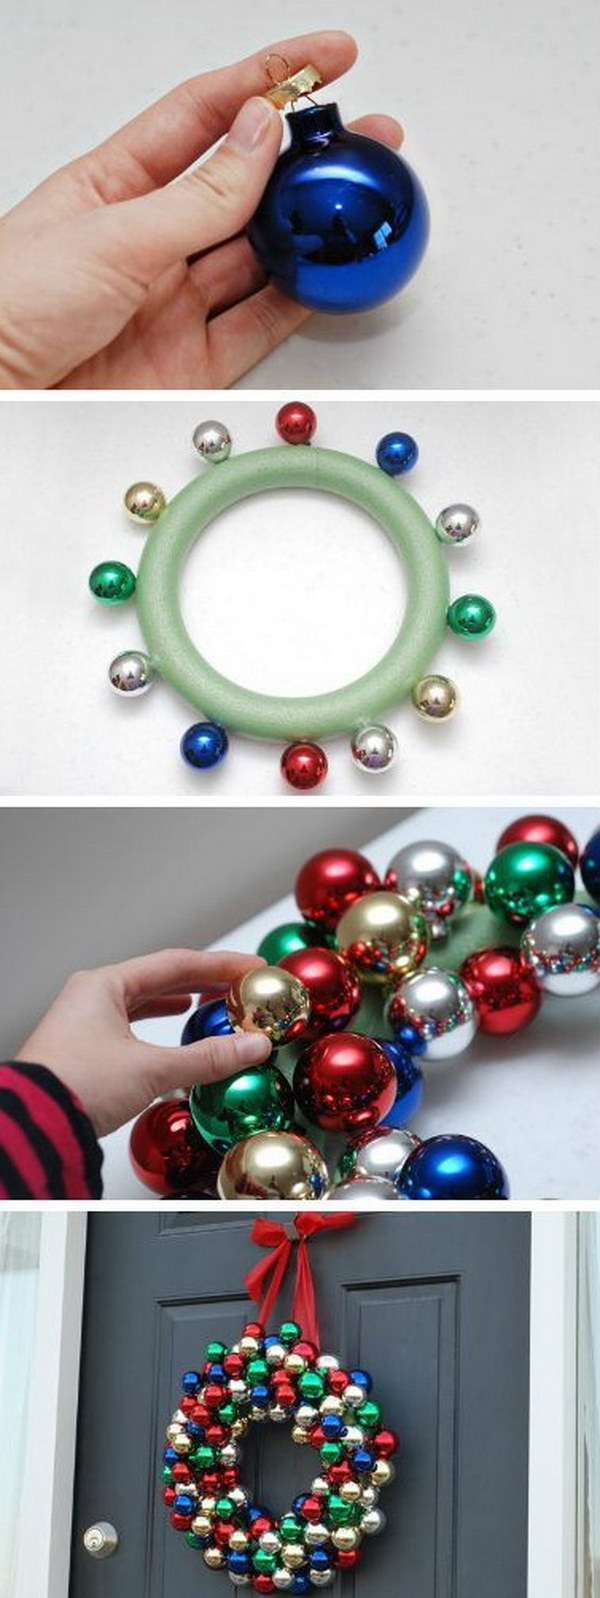 DIY Christmas wreath. Super simple and inexpensive Christmas wreath. Look perfect on your front door!